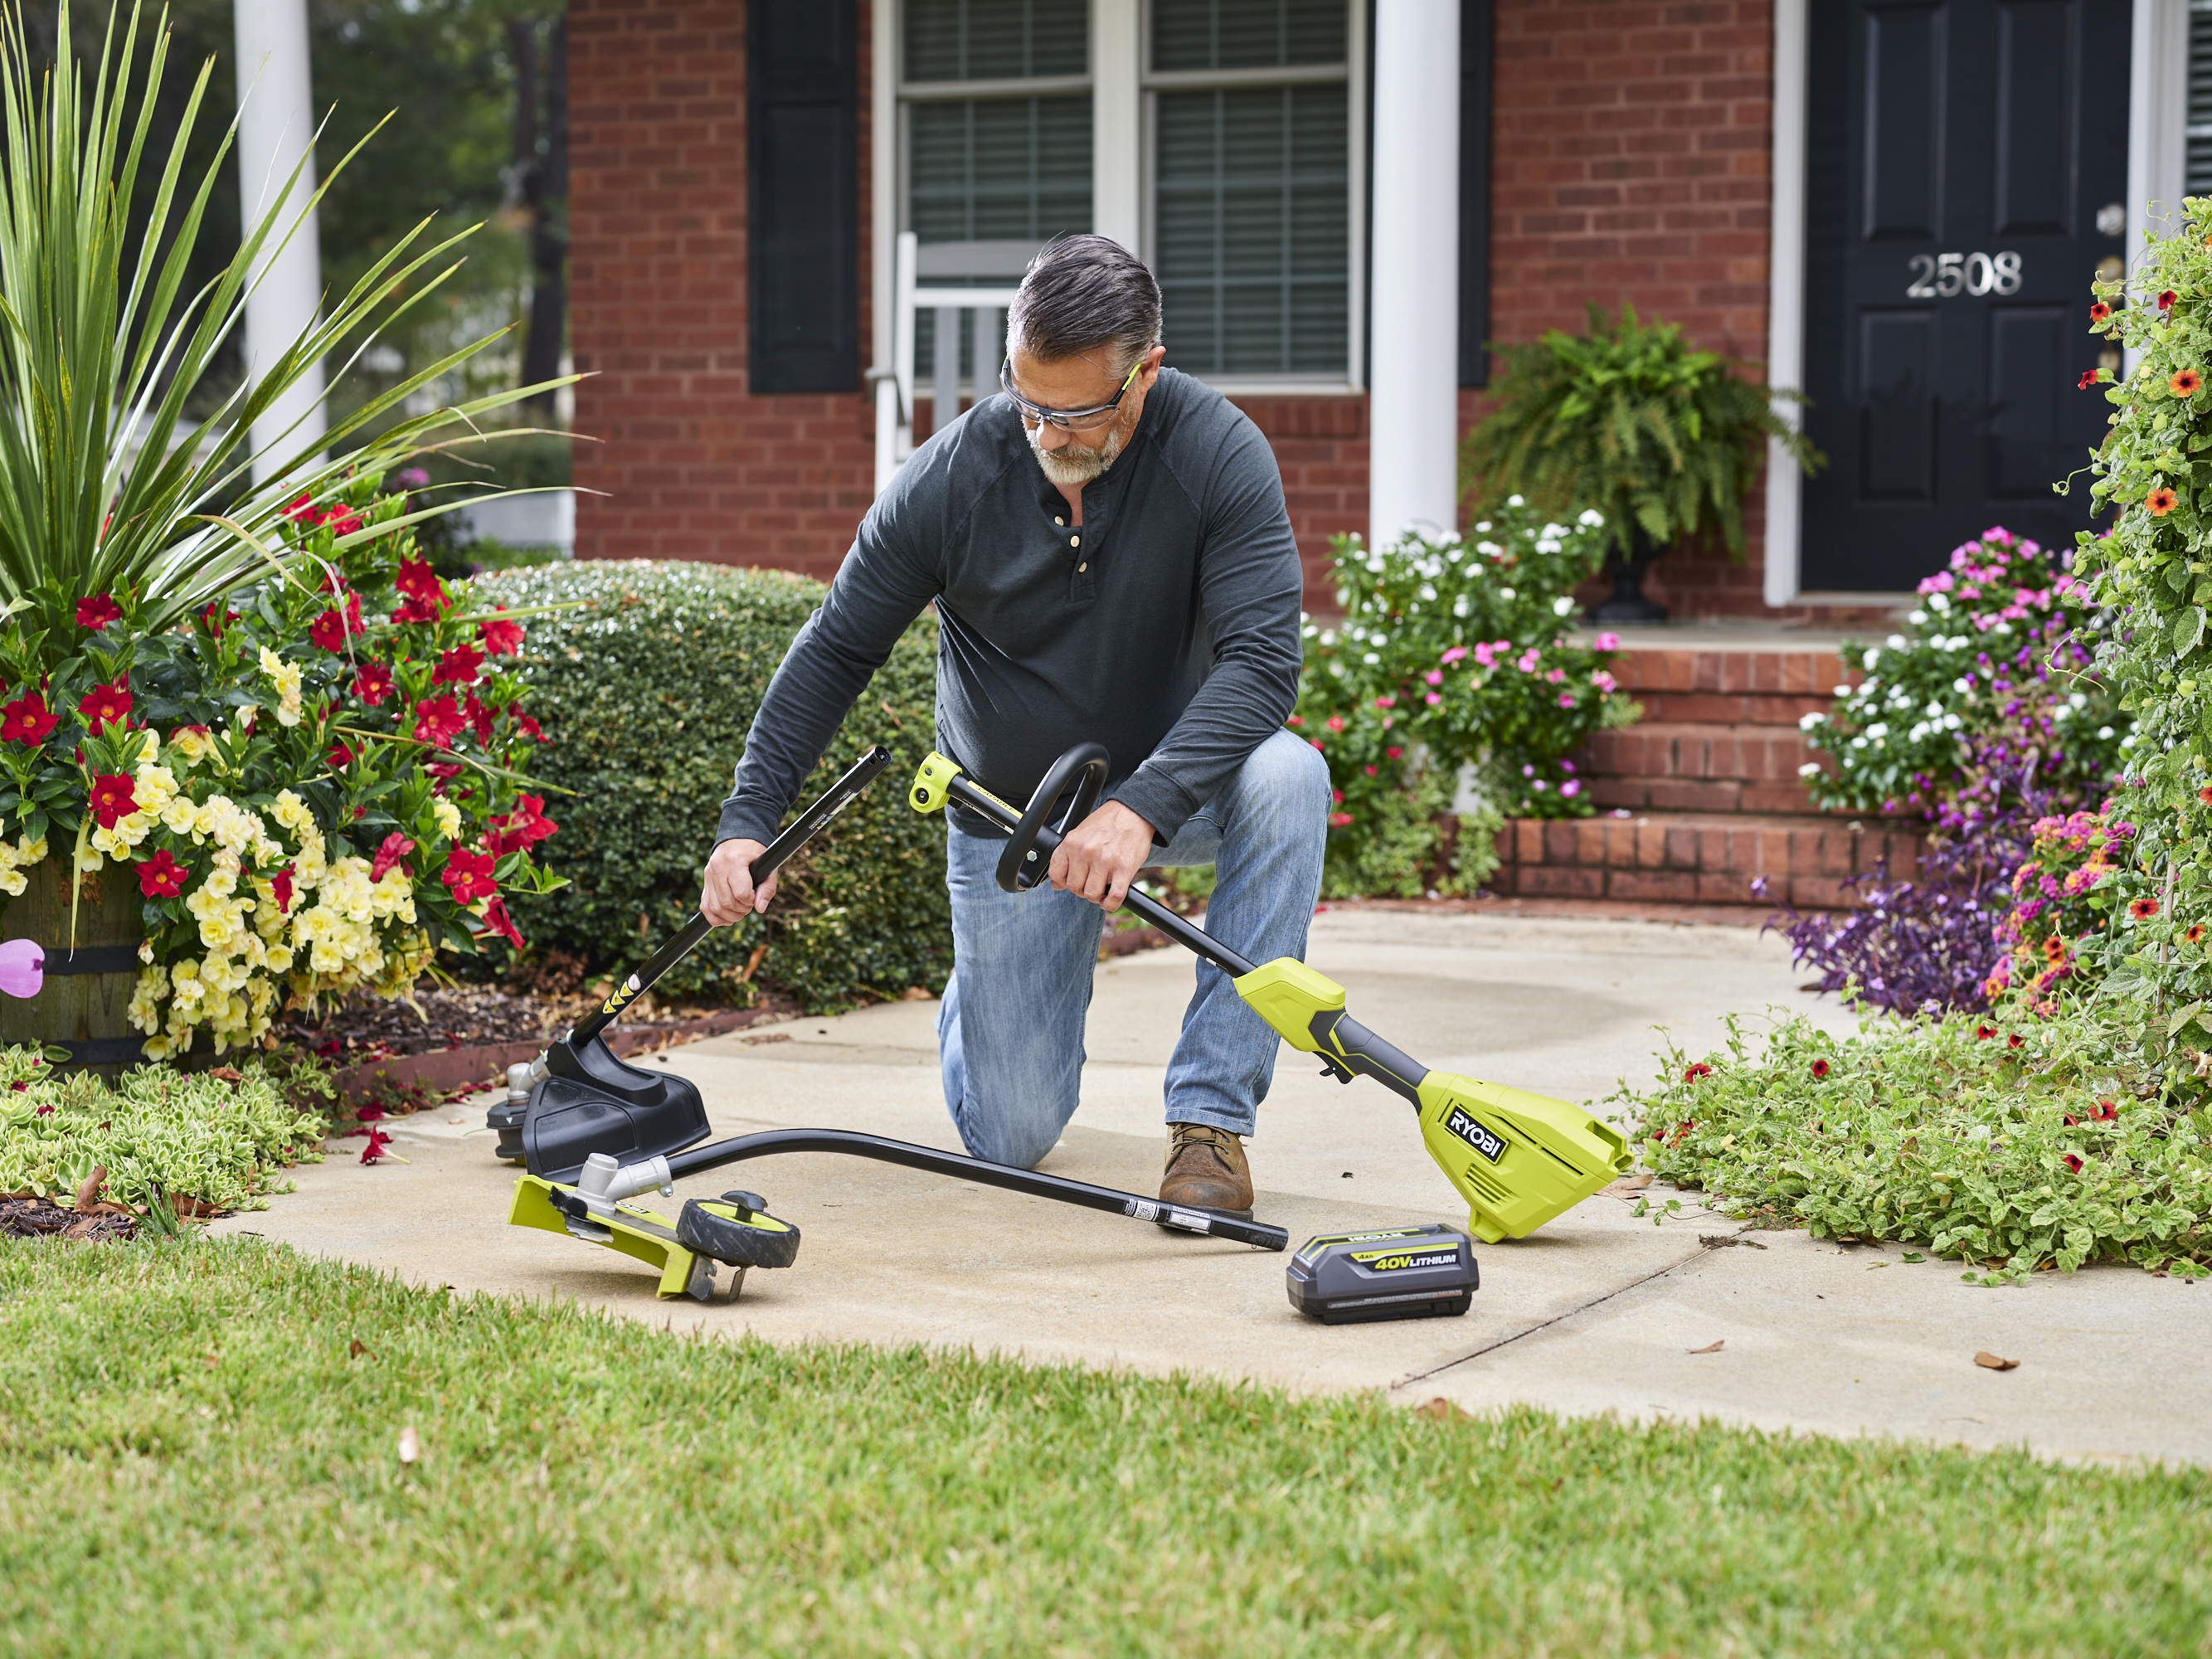 Compatible with RYOBI EXPAND-IT Attachments and Other Universal Attachments